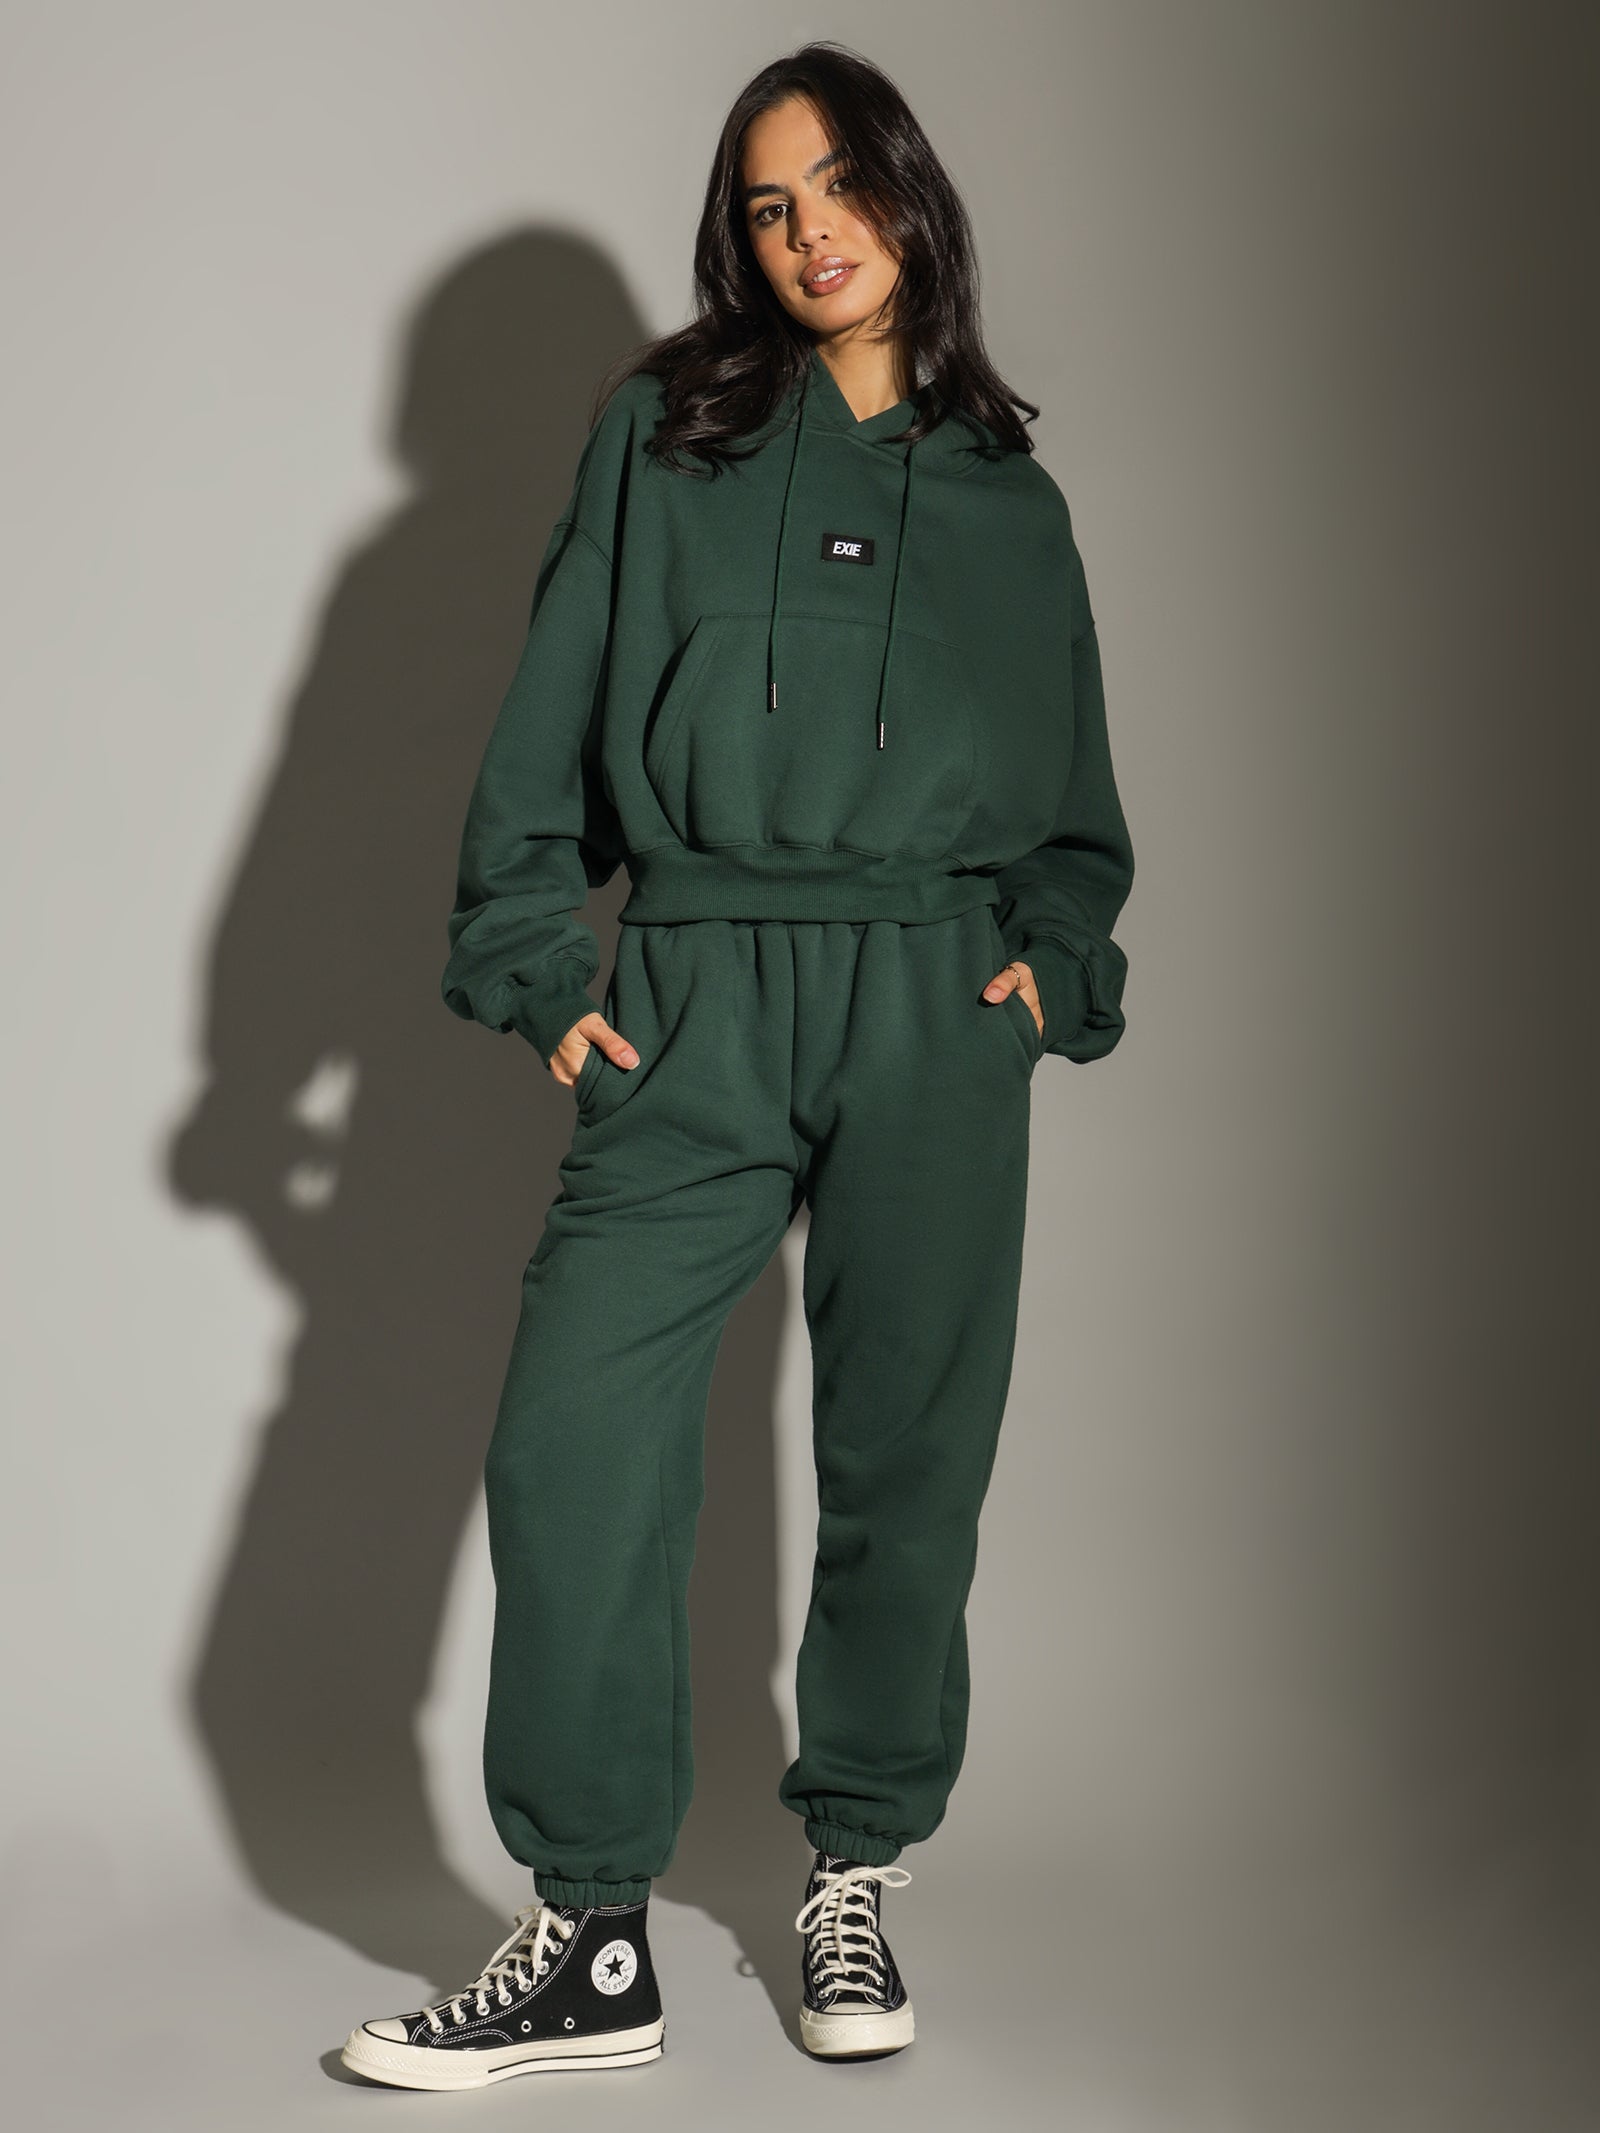 O.G. Logo Trackpants in Forest